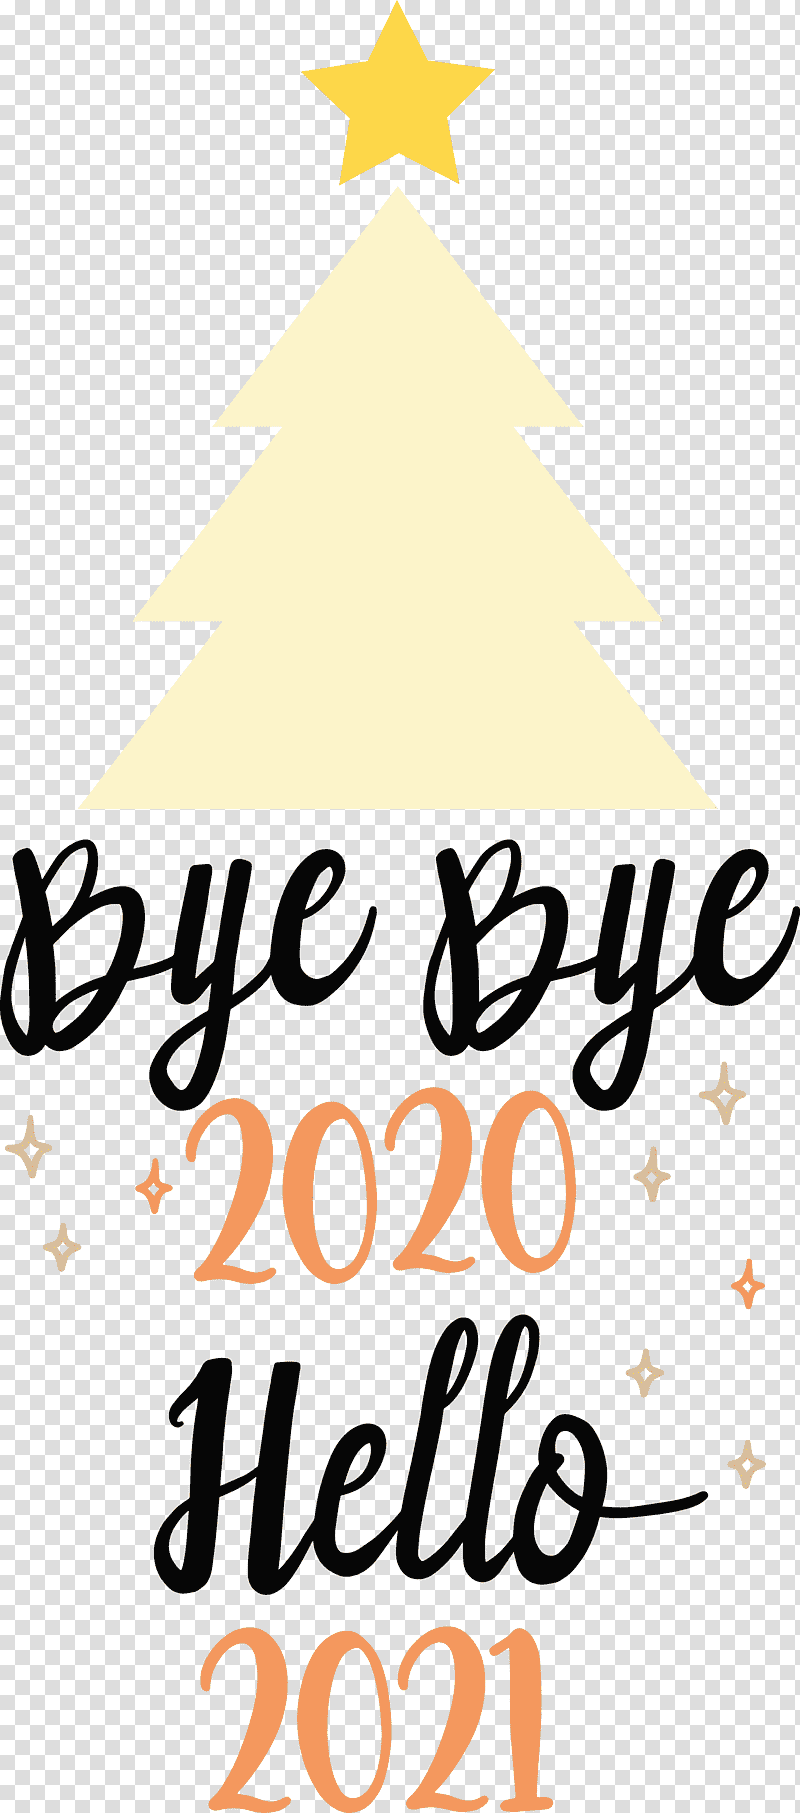 Christmas tree, Hello 2021 Year, Bye Bye 2020 Year, Watercolor, Paint, Wet Ink, Logo transparent background PNG clipart